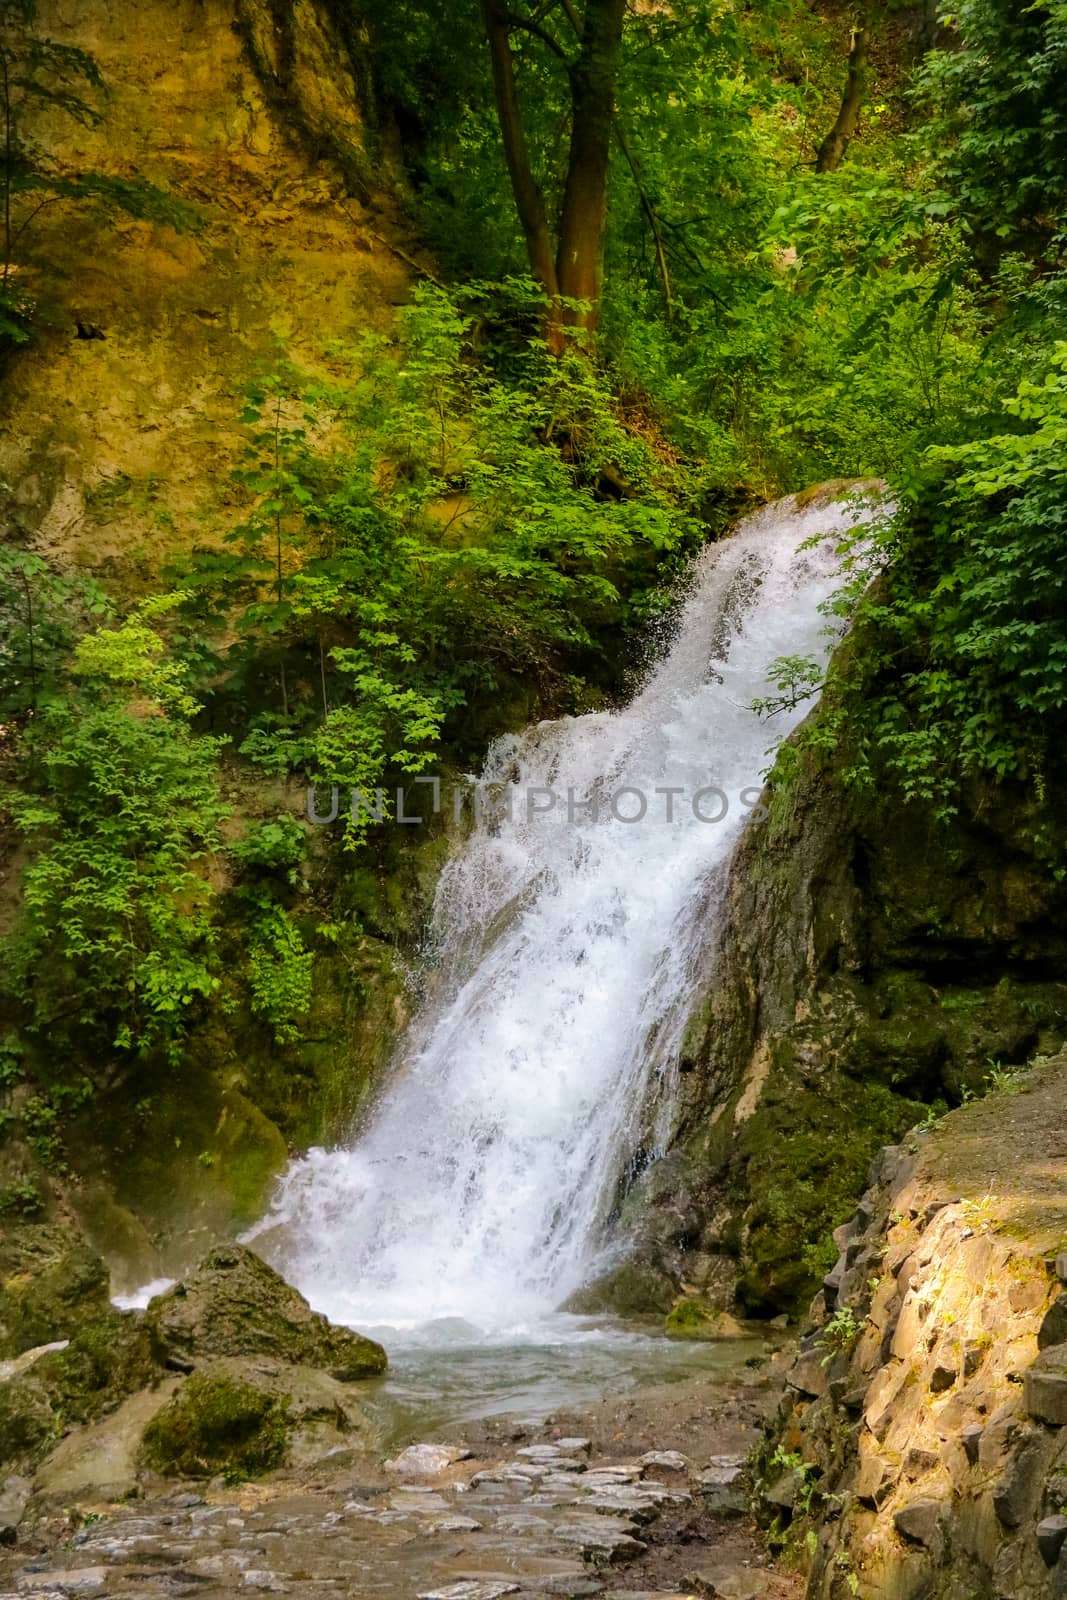 View of a small waterfall surrounded by greenery and trees